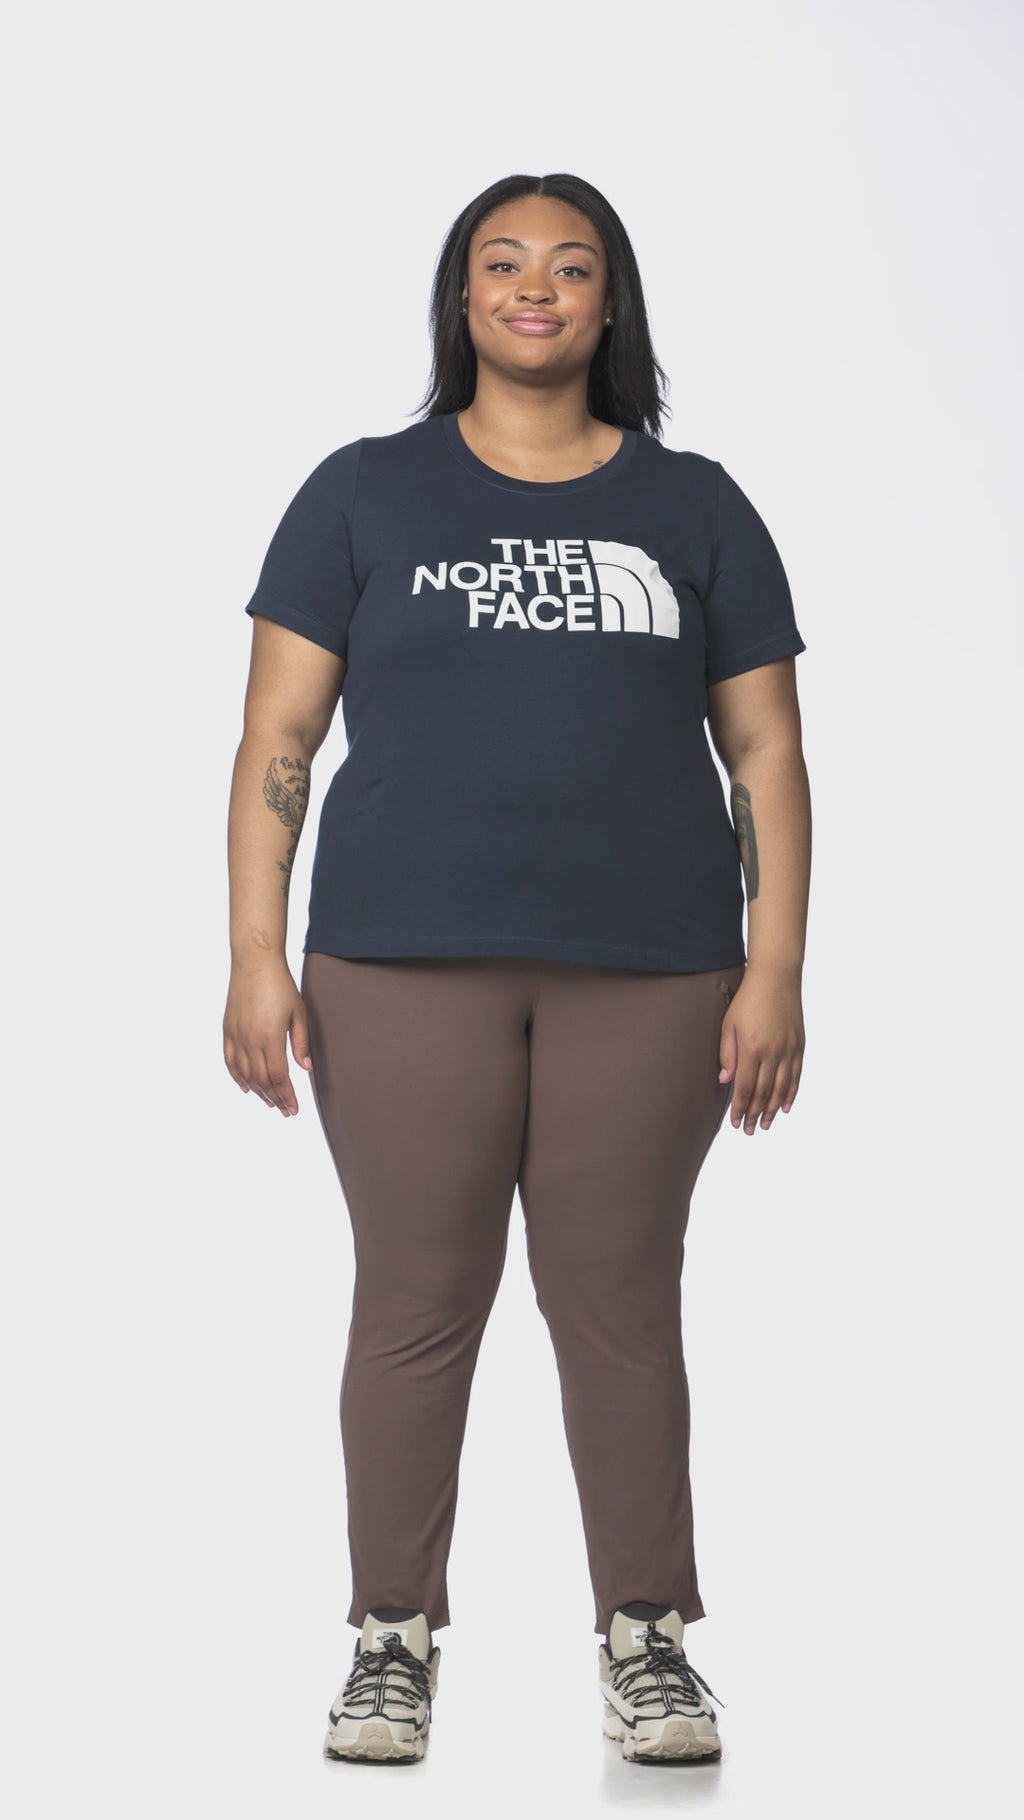 The North Face Women's Plus Size S/S Half Dome Tee